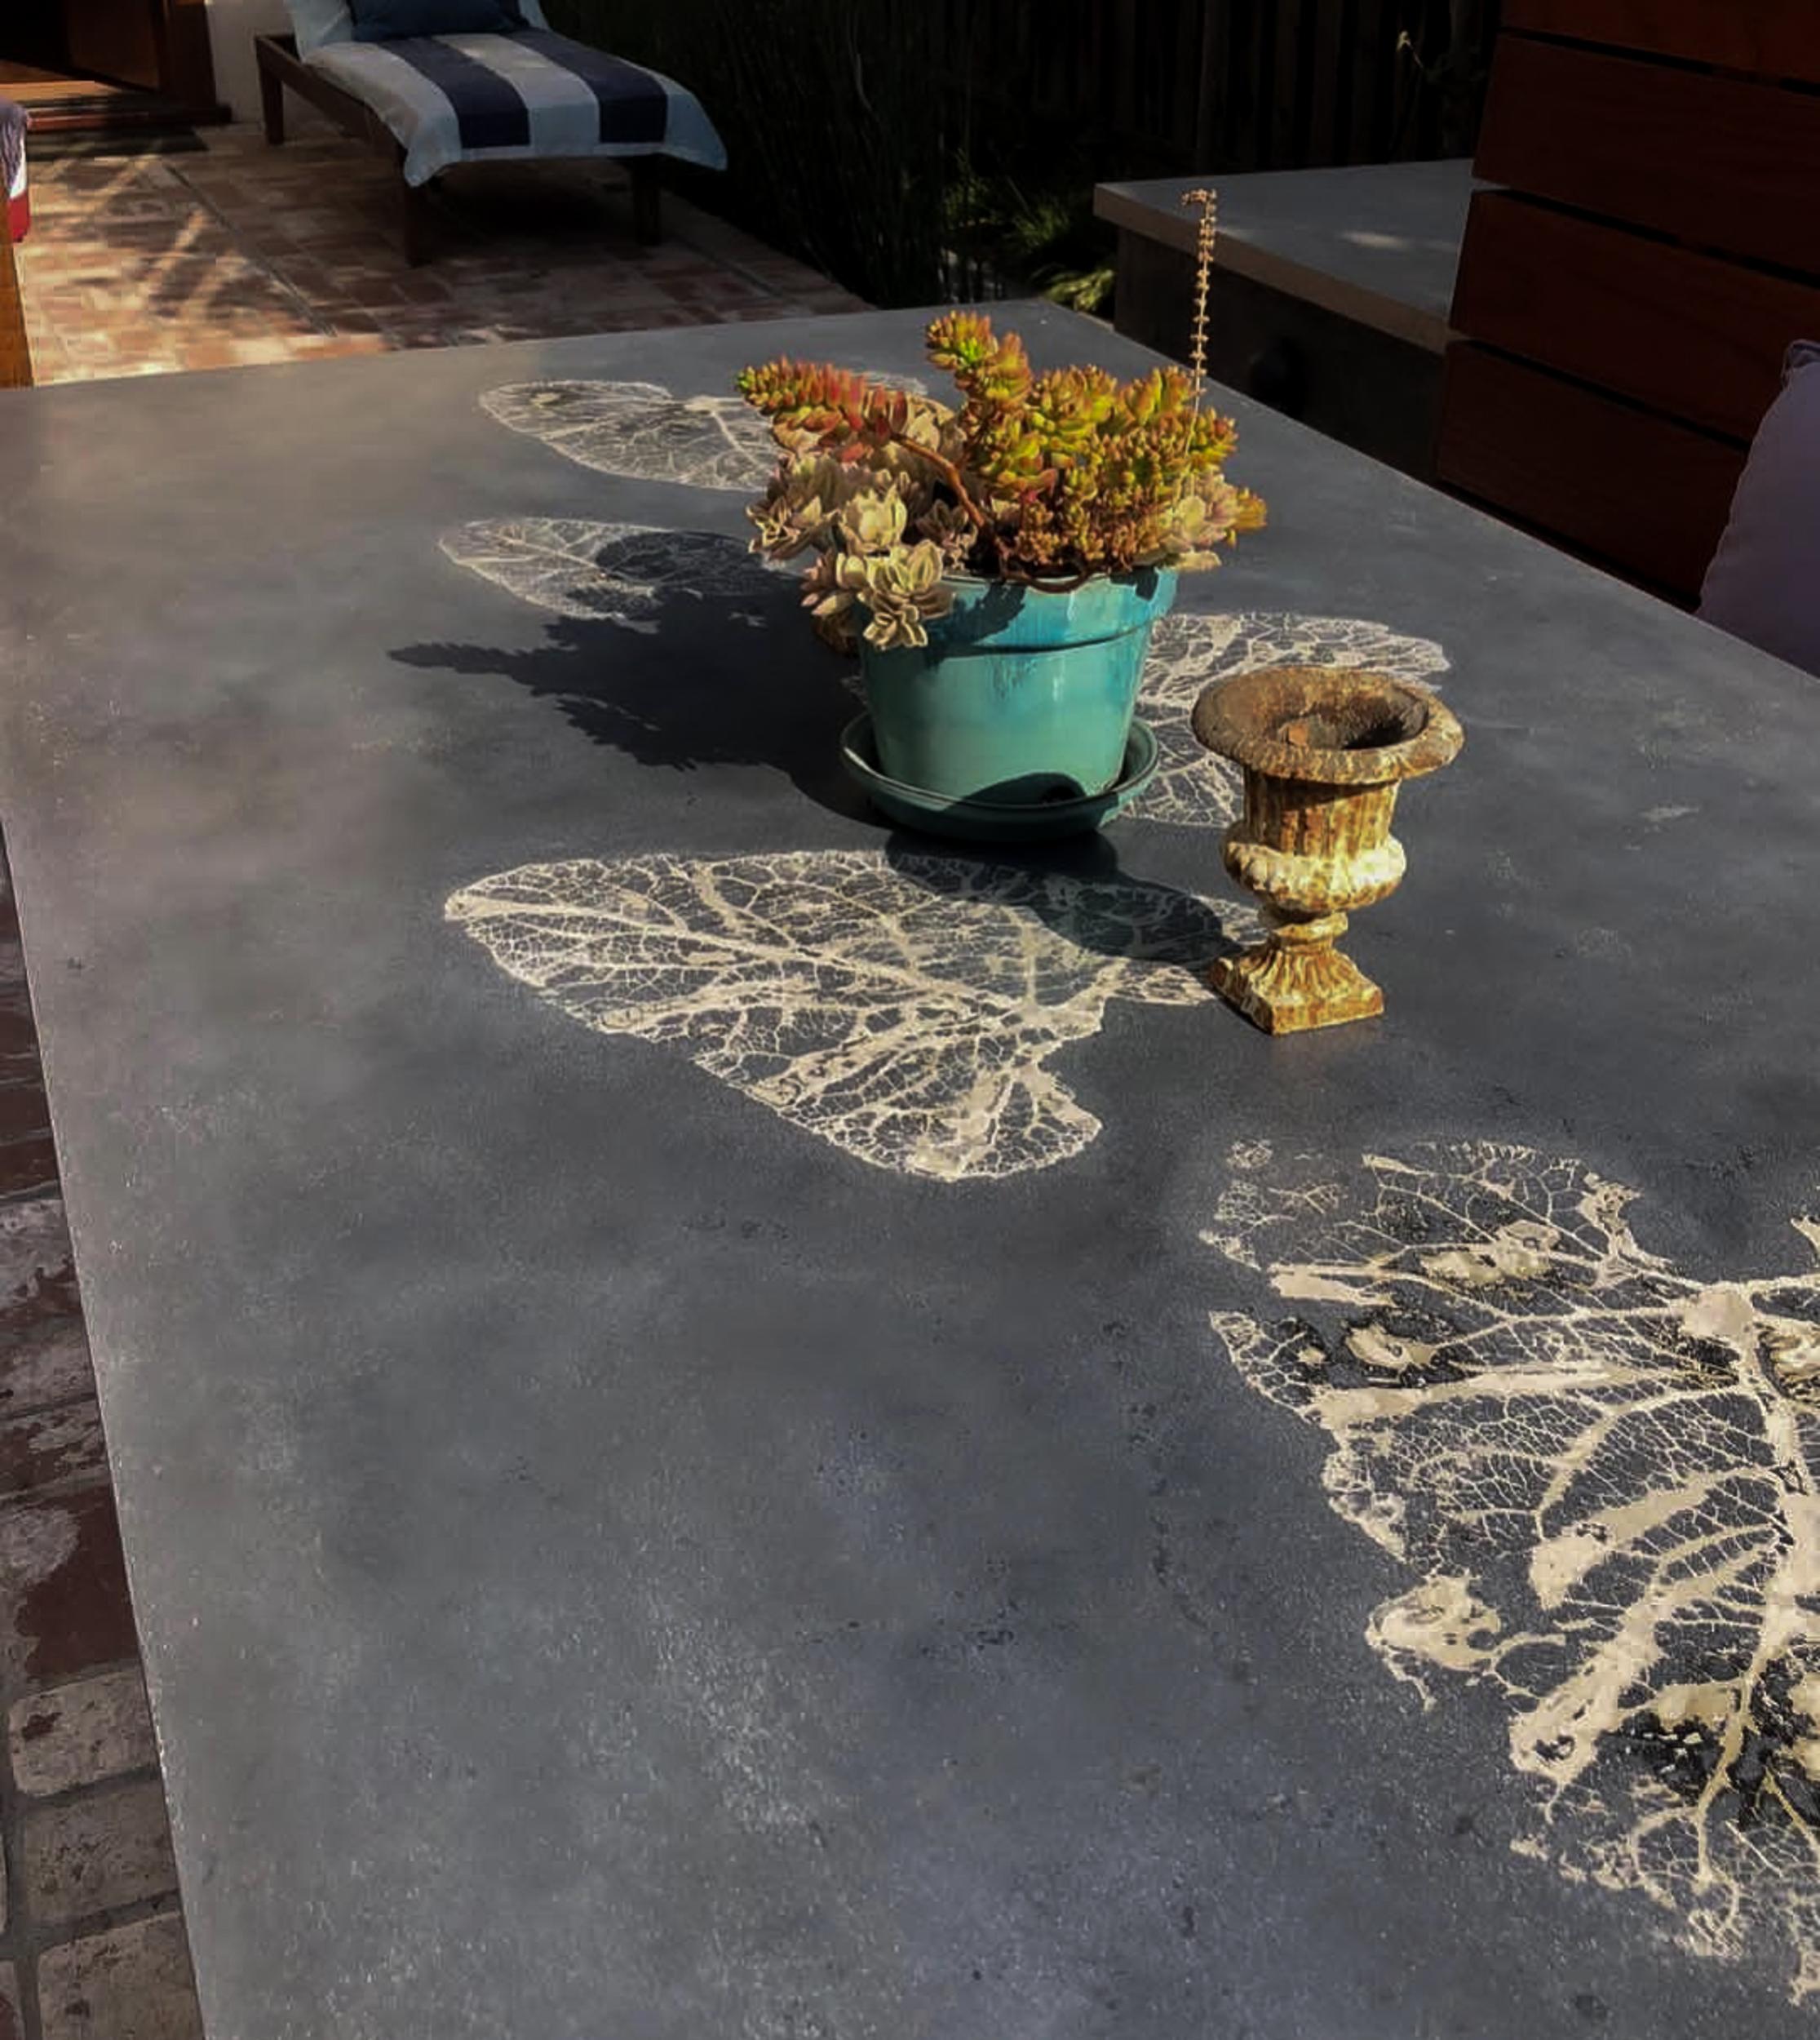 These highly customizable mid-weight square or rectangular concrete dining, console, or coffee table tops with or without impressions from real leaves can make a natural addition to nearly any room or outdoor environment. Bases are not included, and